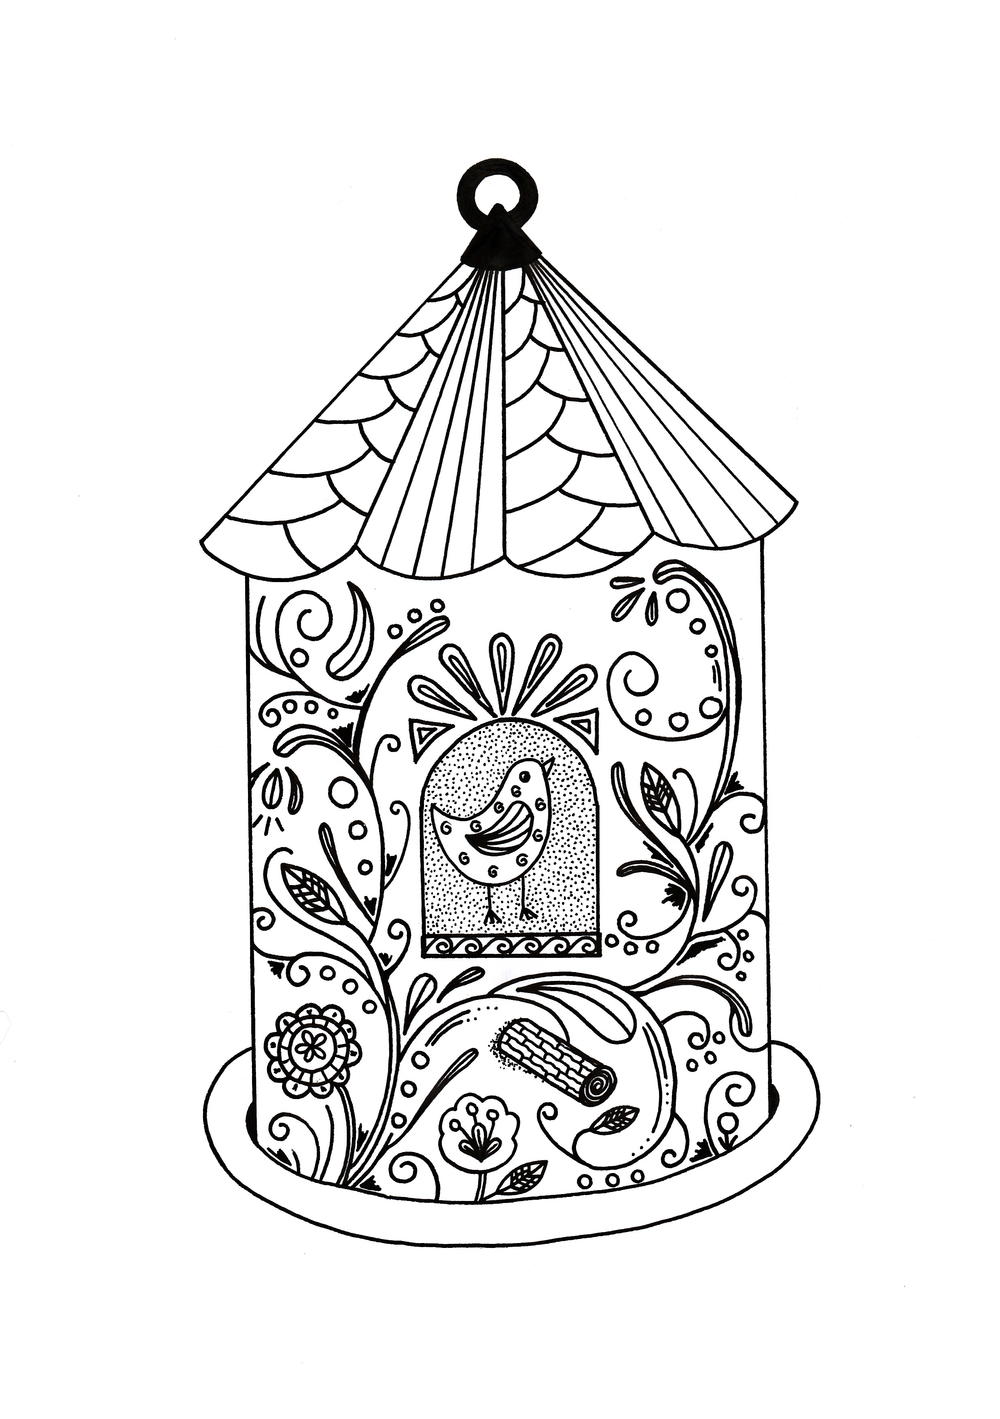 Whimsical Bird House Adult Coloring Page   FaveCrafts.com